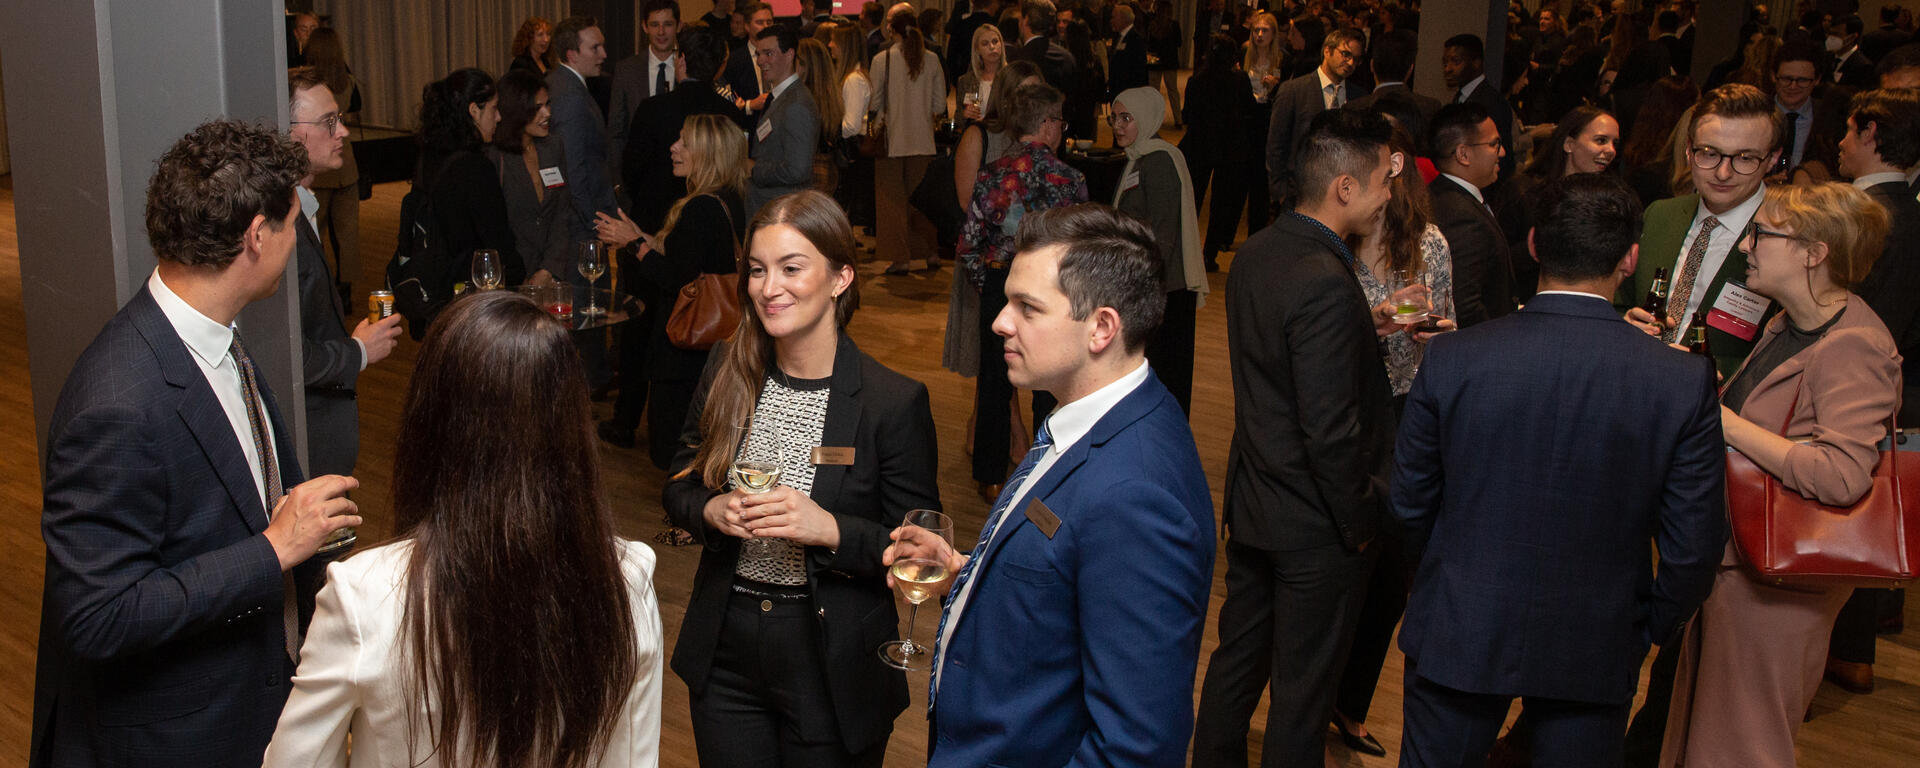 Students and lawyers mingle at a networking reception